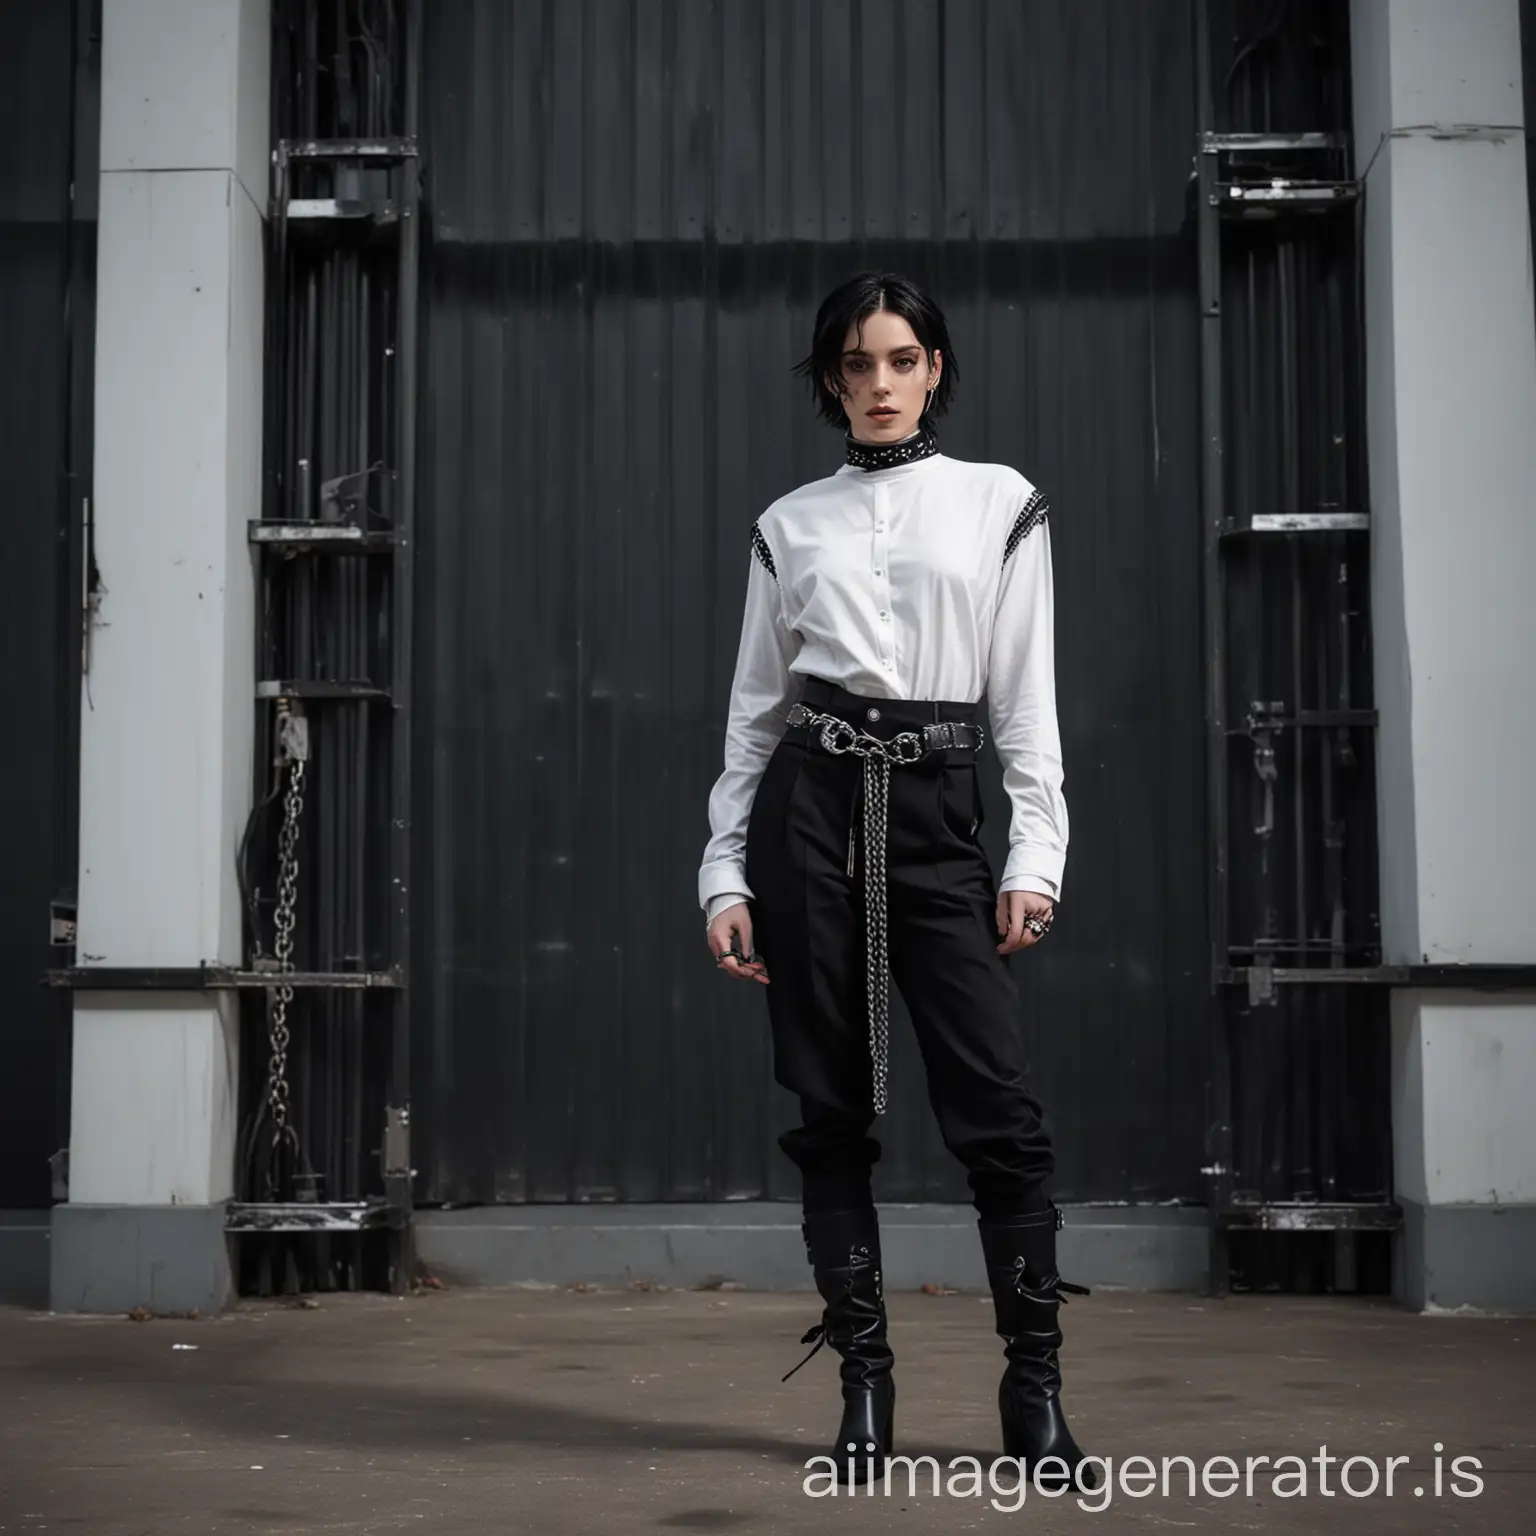 black-haired male, androgynous look, shoulder-length hair, black turtleneck with chains overlay, half-buttoned white shirt with rolled up sleeves, cuffed black baggy pants with dramatic belt, ankle-length heeled boots, in front of a futuristic building, night, full body